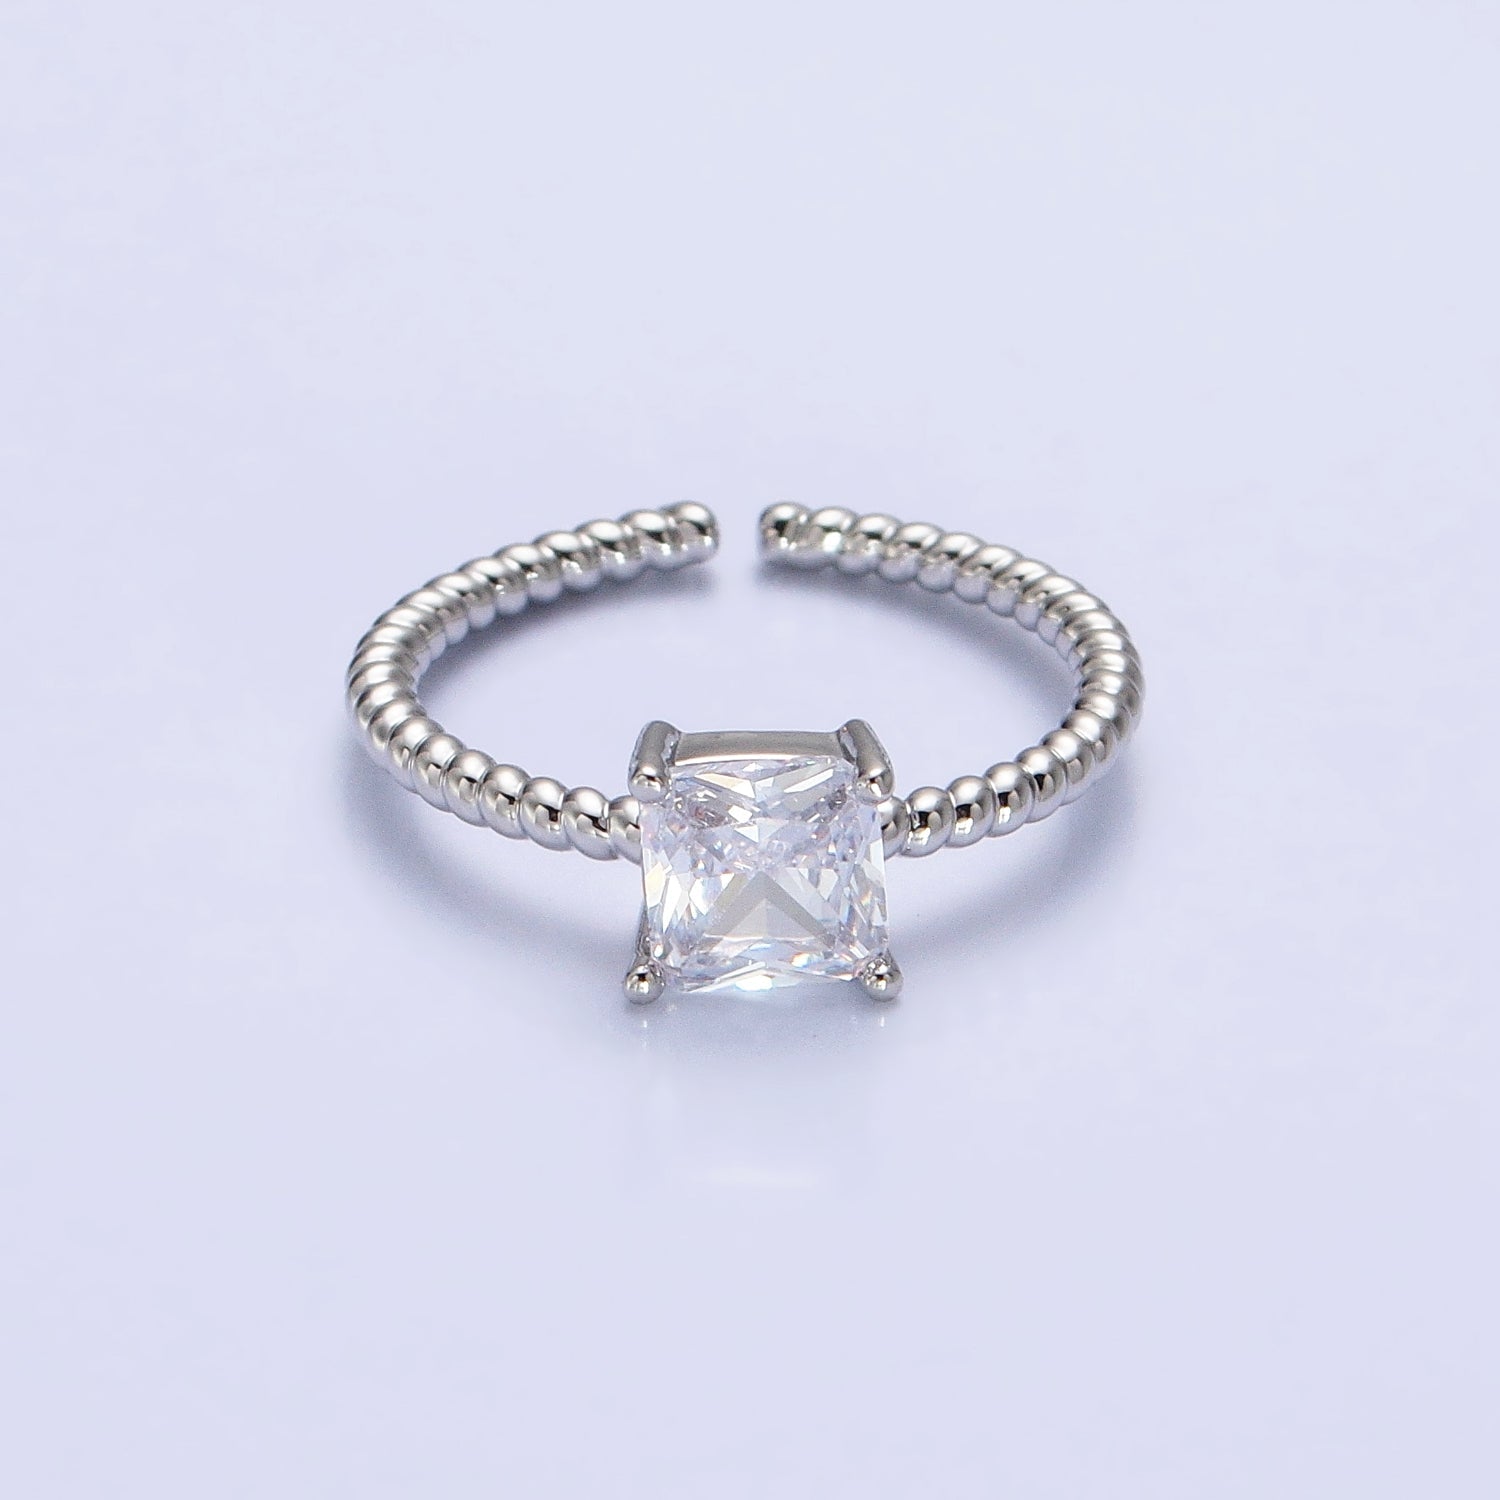 16K Gold Filled Clear Square CZ Croissant Twist Adjustable Ring in Gold & Silver | O1968 O1969